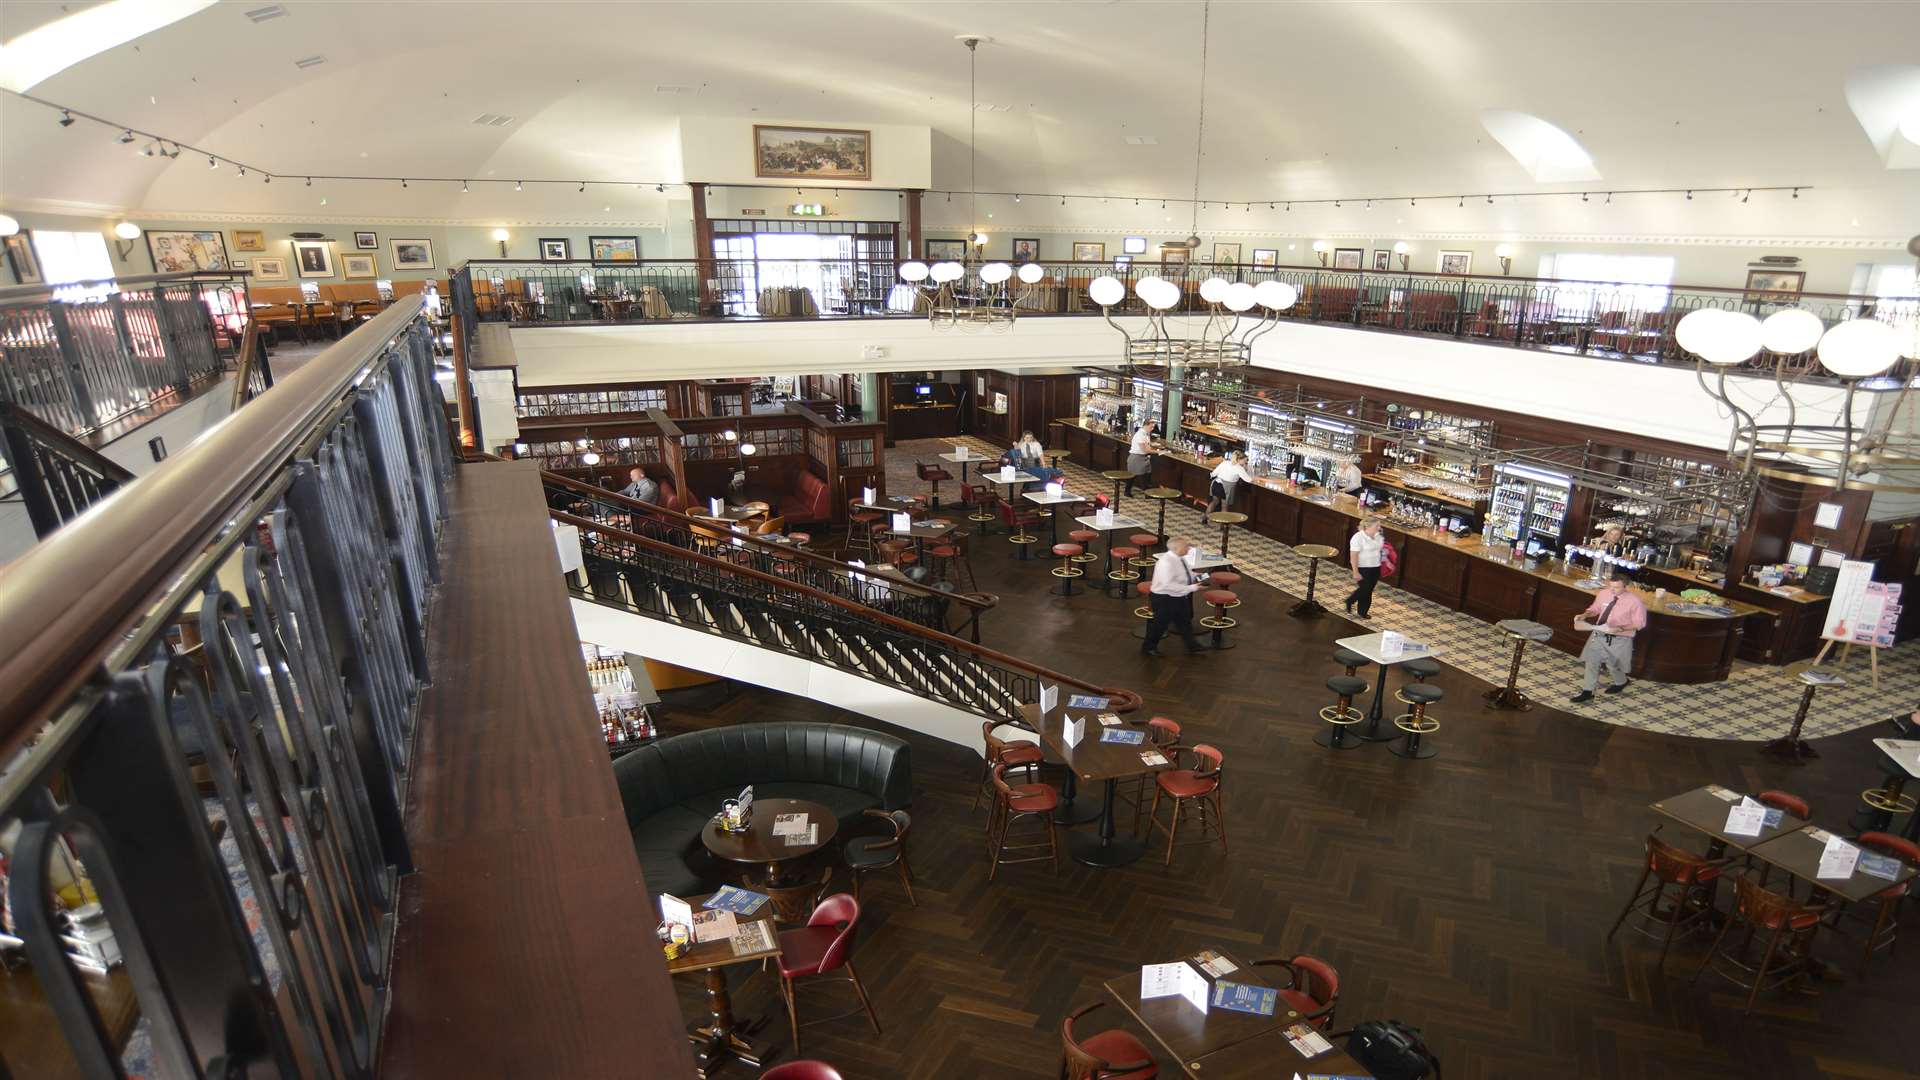 Royal Victoria Pavilion in Ramsgate is the UK's largest Wetherspoons pub